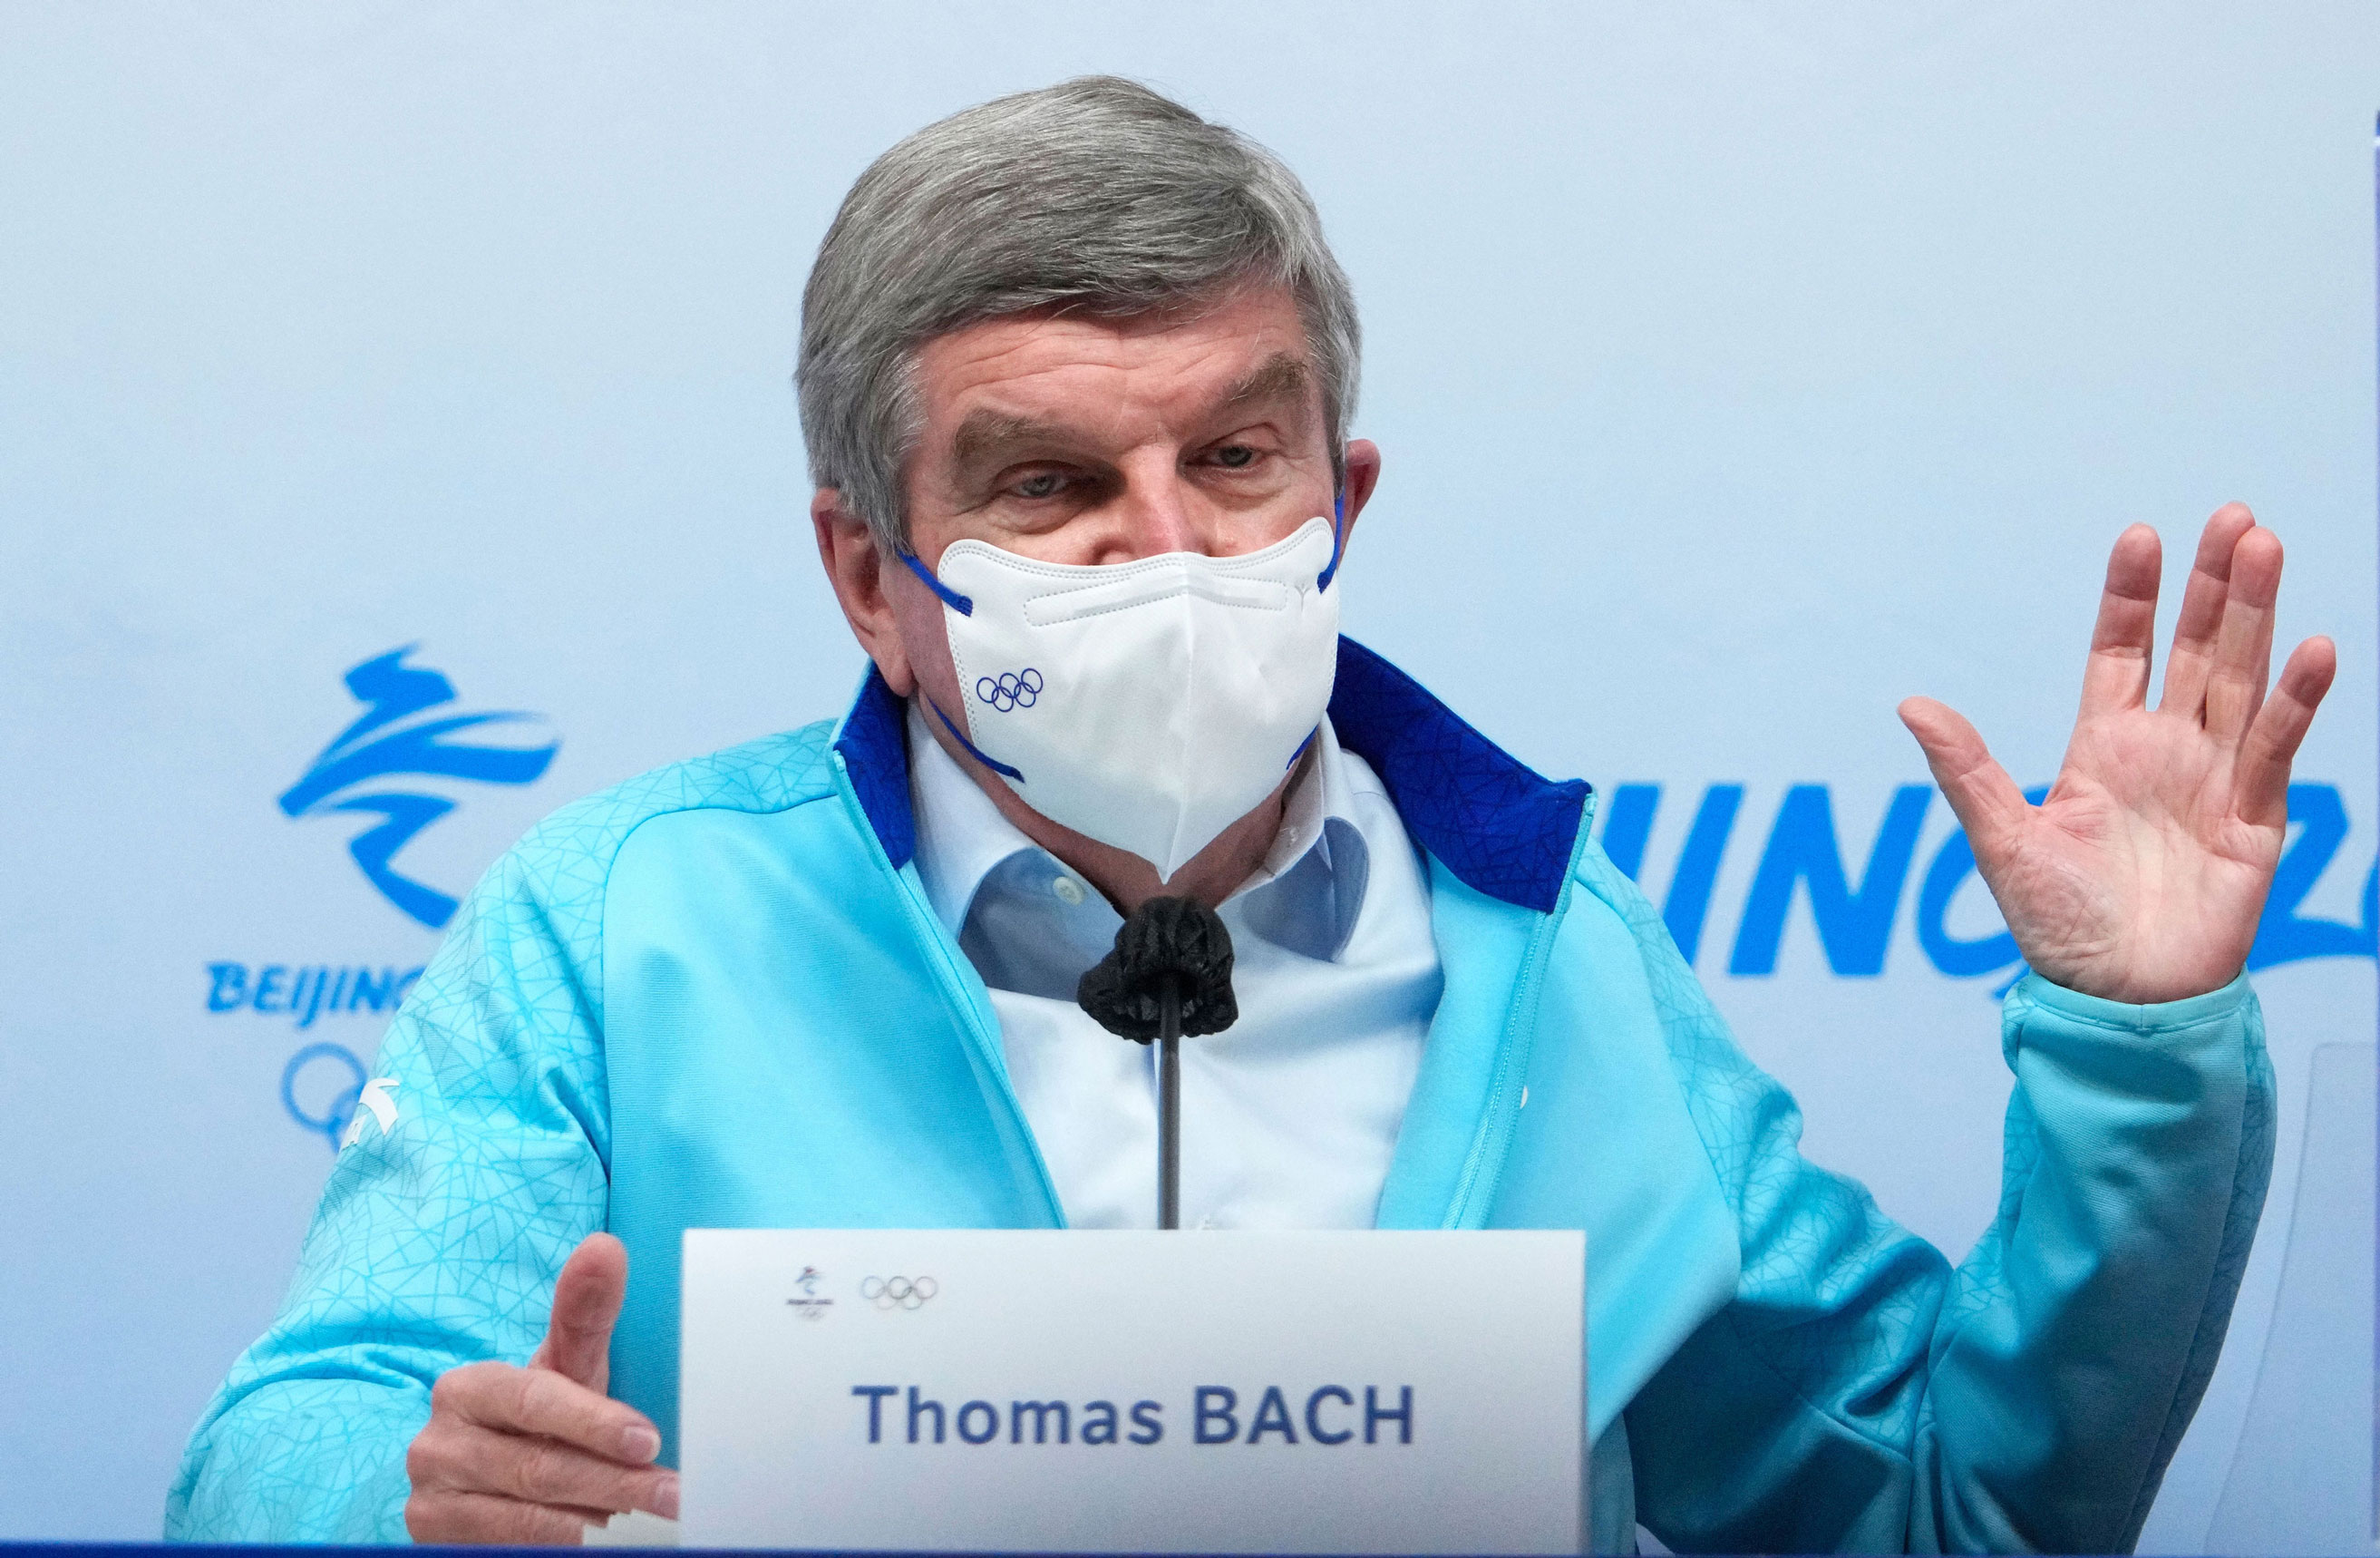 IOC President Thomas Bach talks to the media during a news conference on Friday.